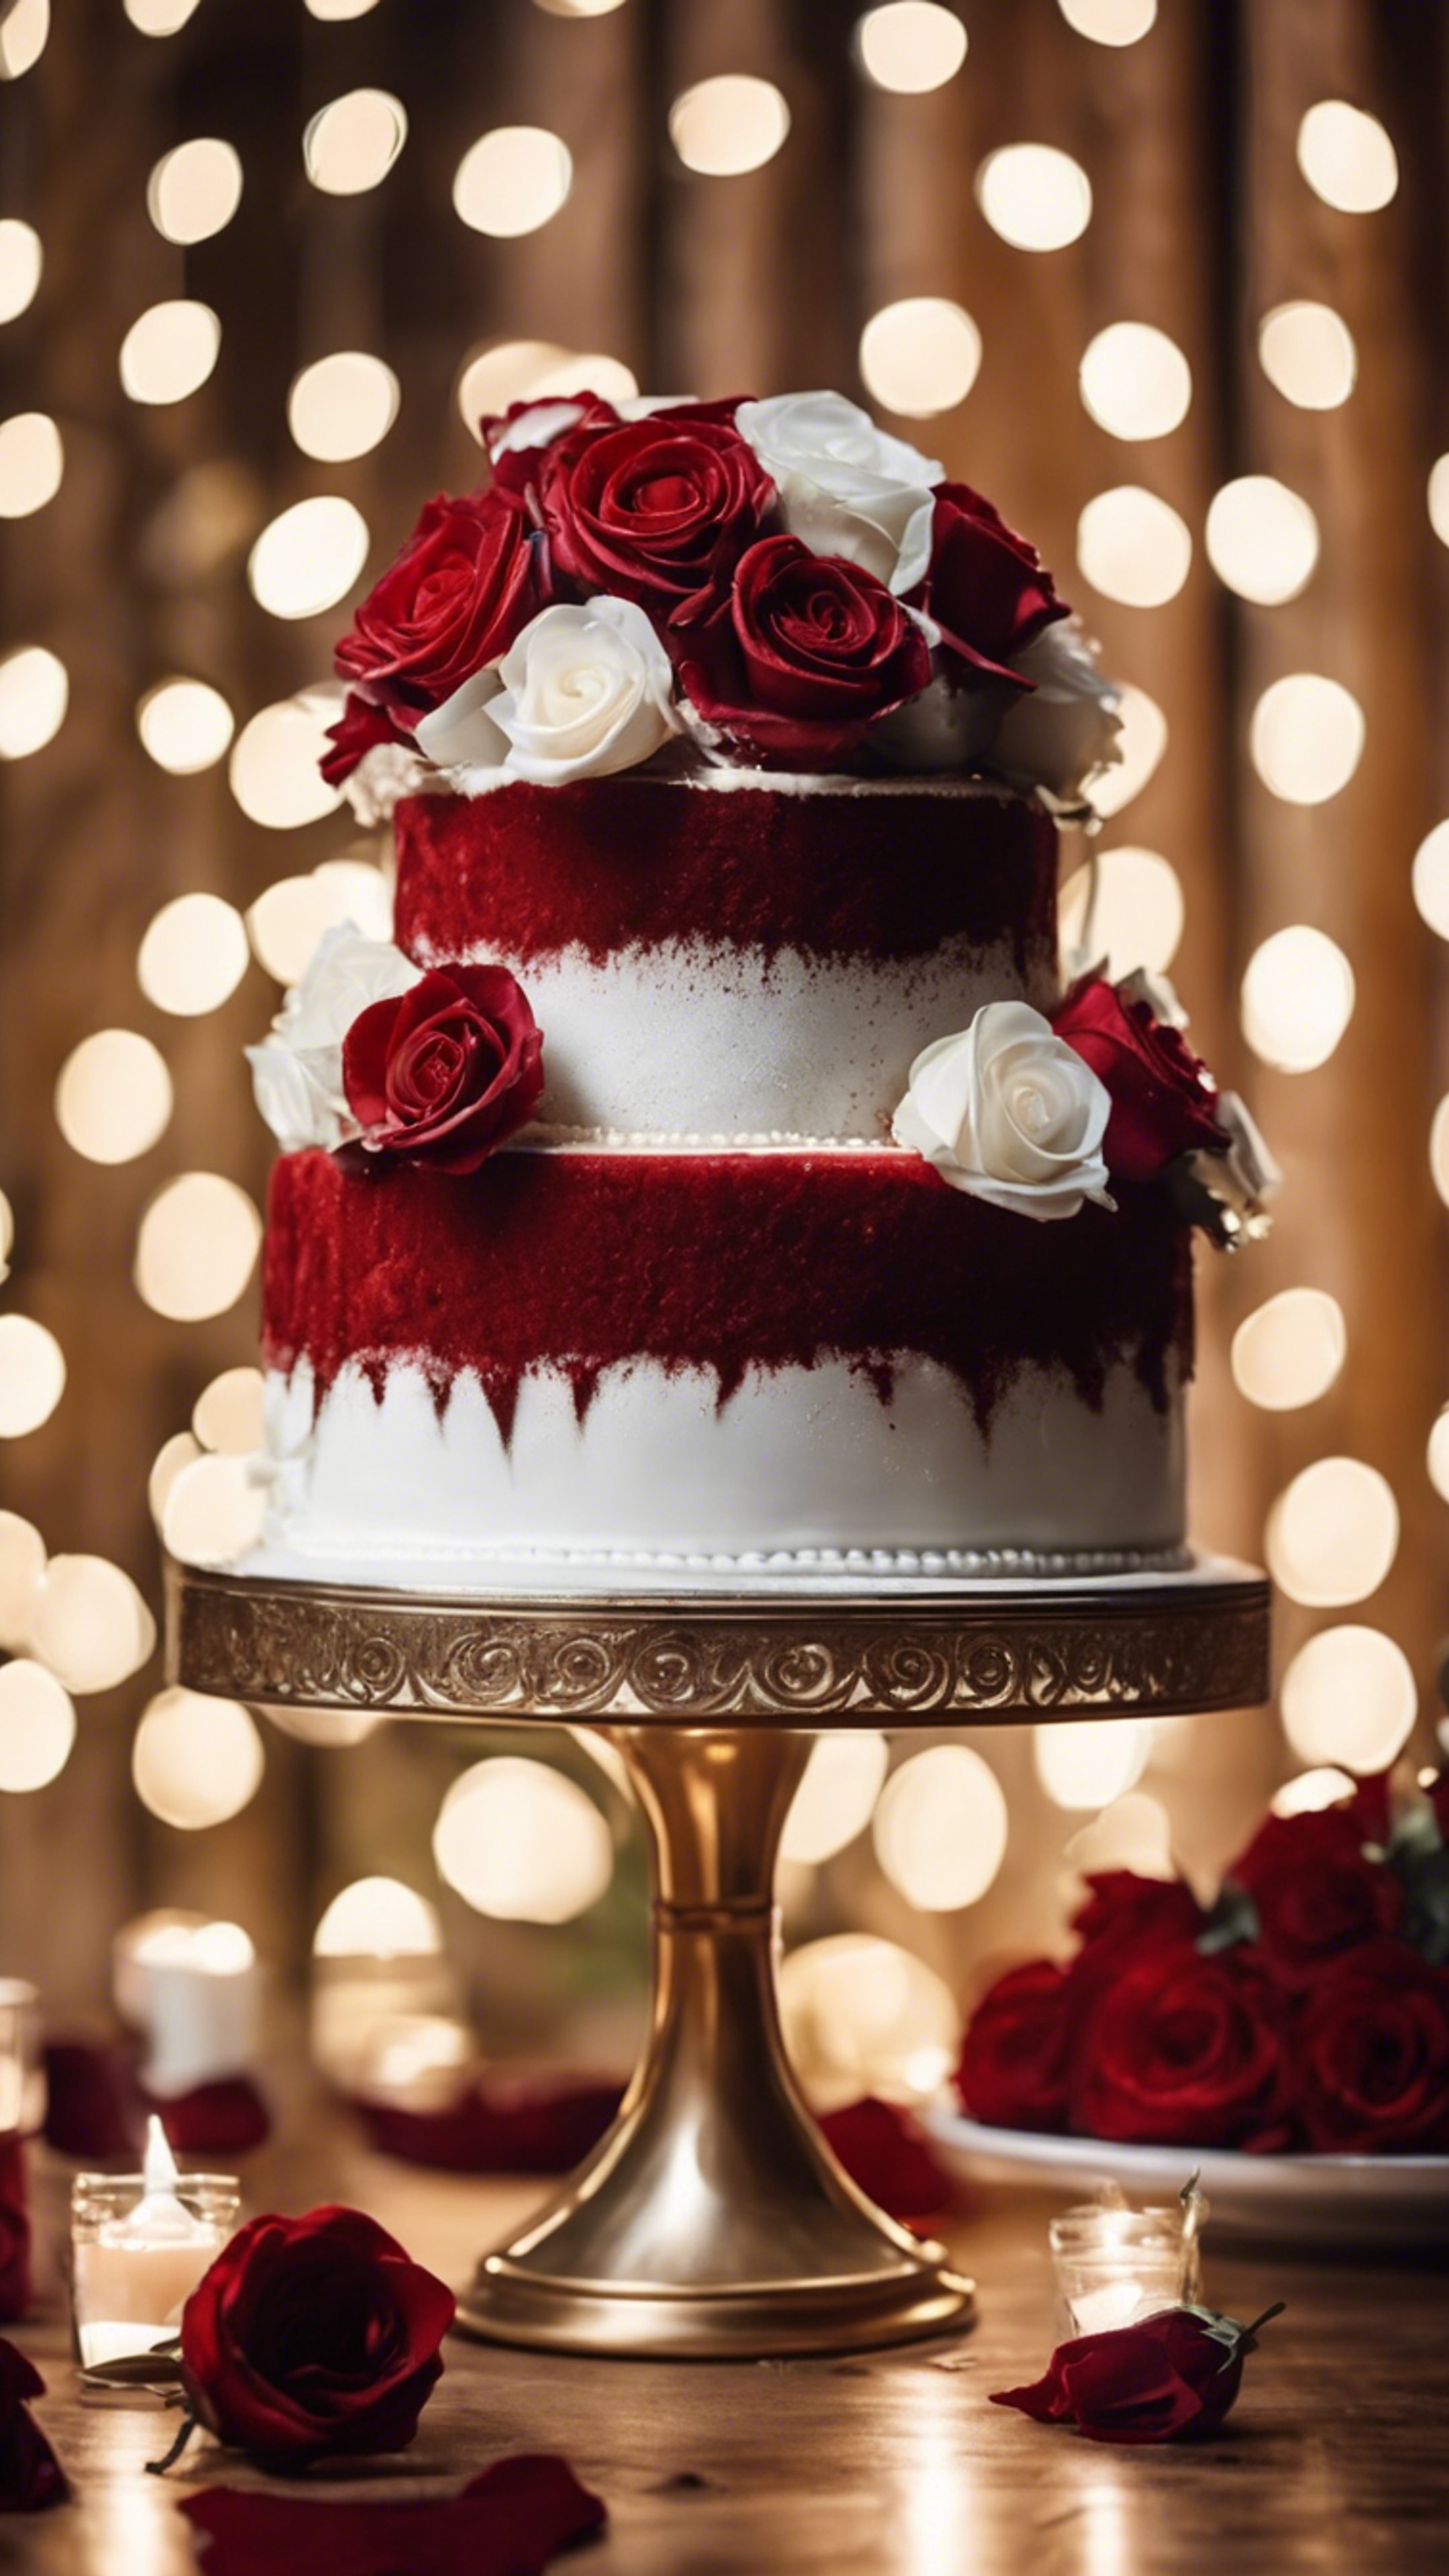 Three-tiered red velvet wedding cake adorned with white roses, against a backdrop of twinkling fairy lights. Дэлгэцийн зураг[b48557e9e8f84a90b888]